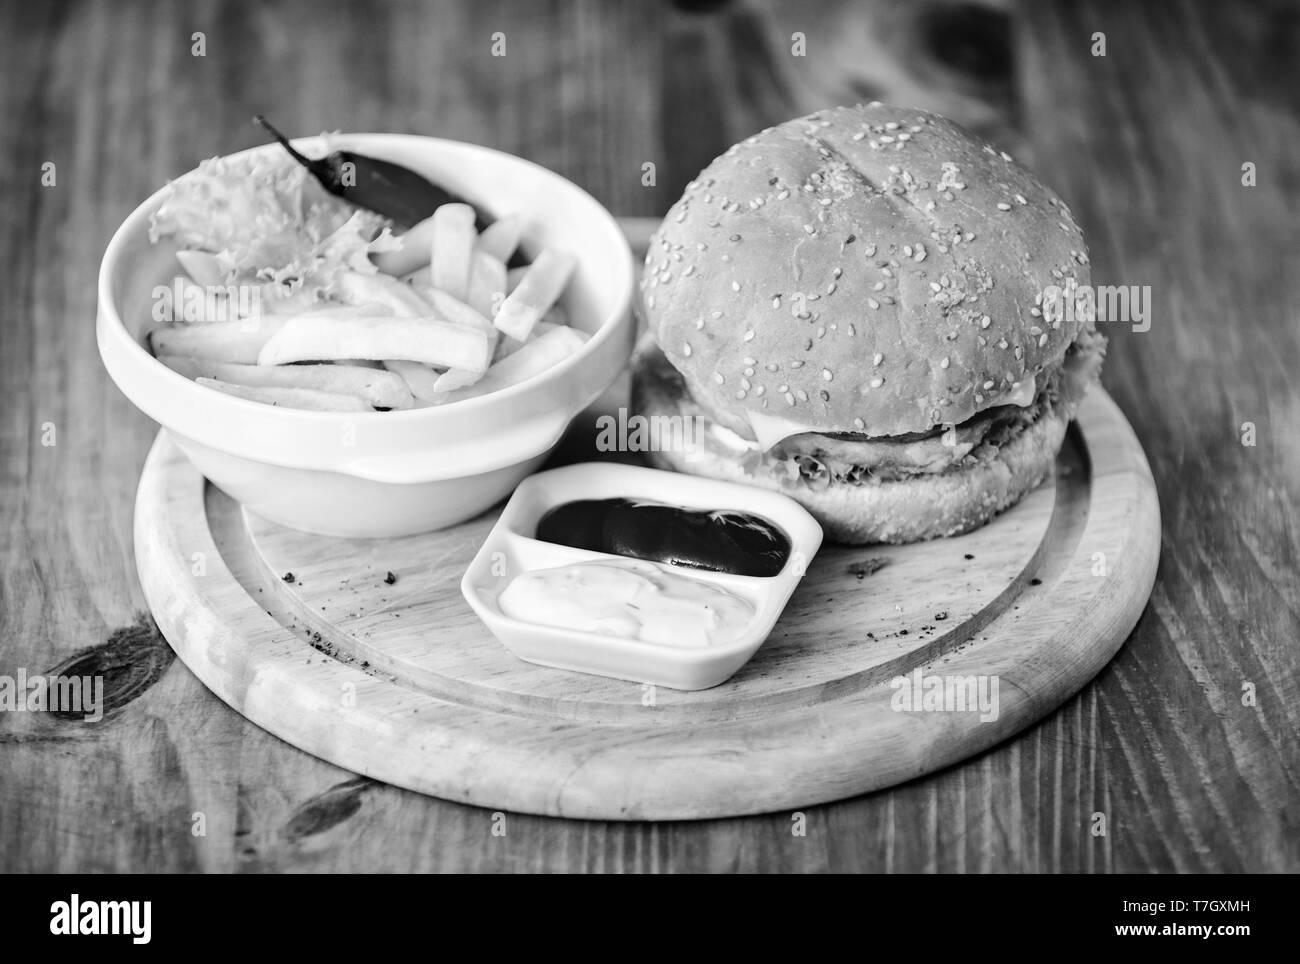 Delicious burger with sesame seeds. Burger menu. High calorie snack. Hamburger and french fries and tomato sauce on wooden board. Fast food concept. Burger with cheese meat and salad. Cheat meal. Stock Photo